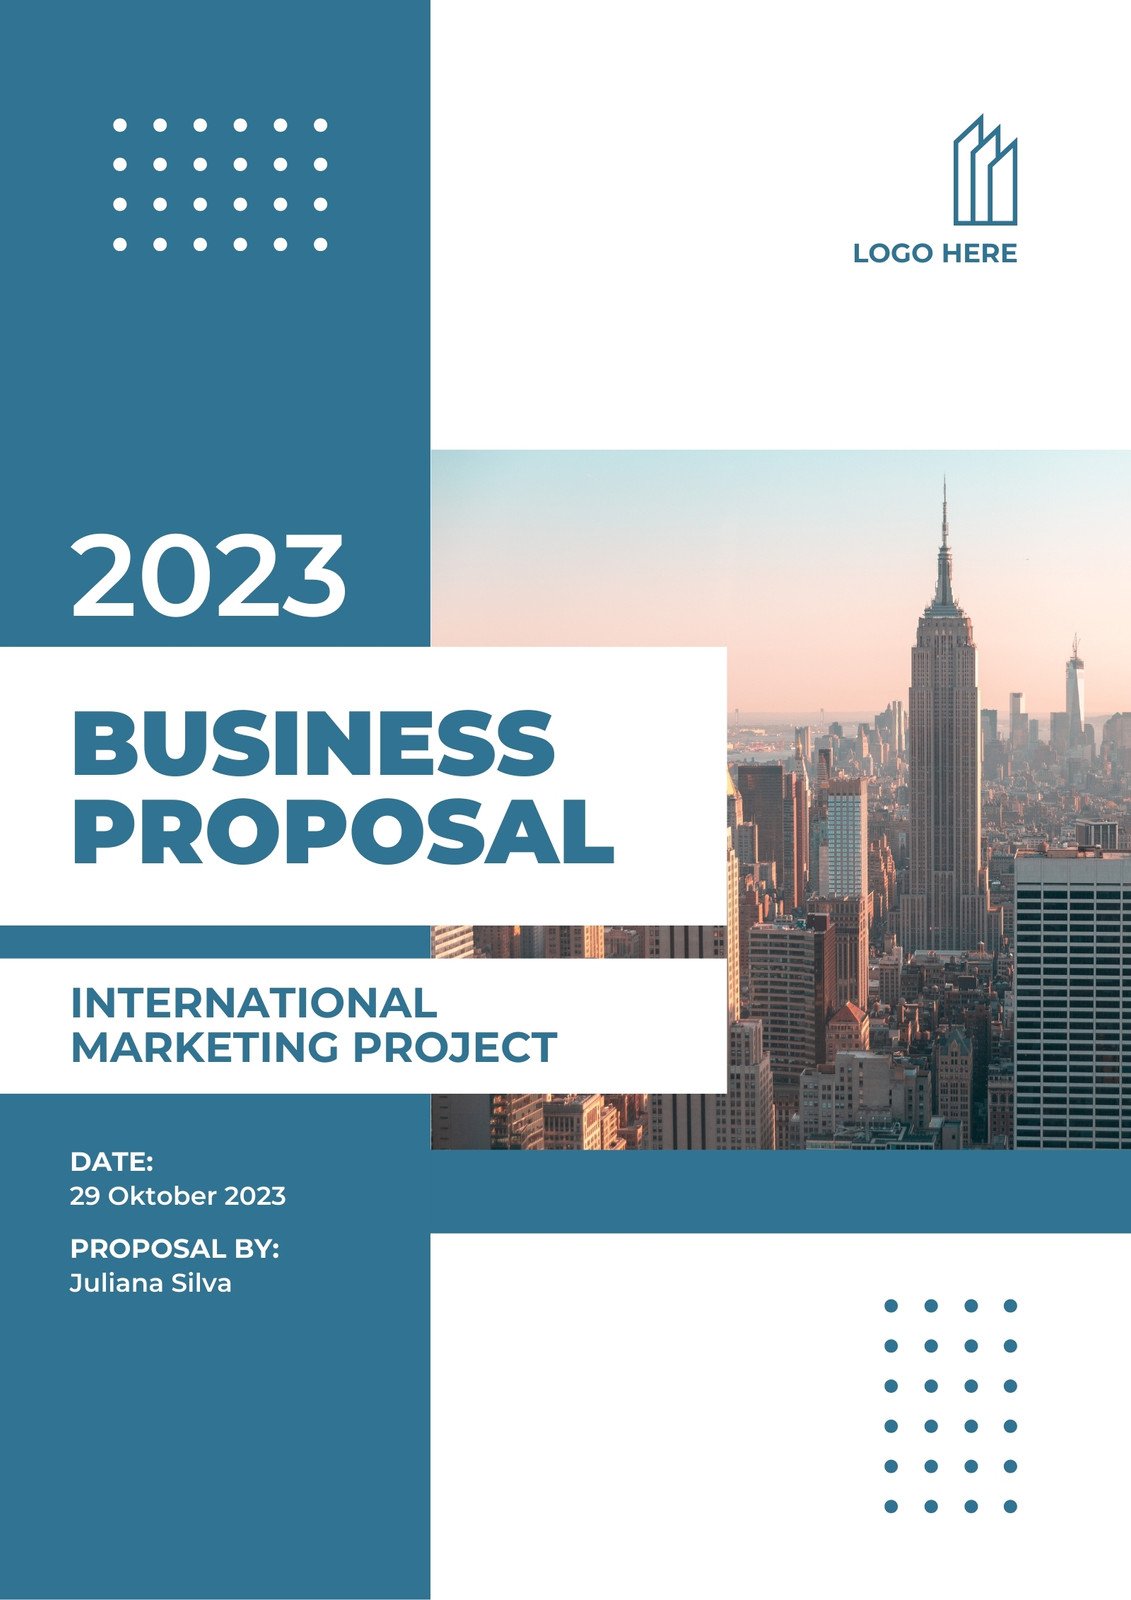 Blue and White Geometric Business Proposal Cover